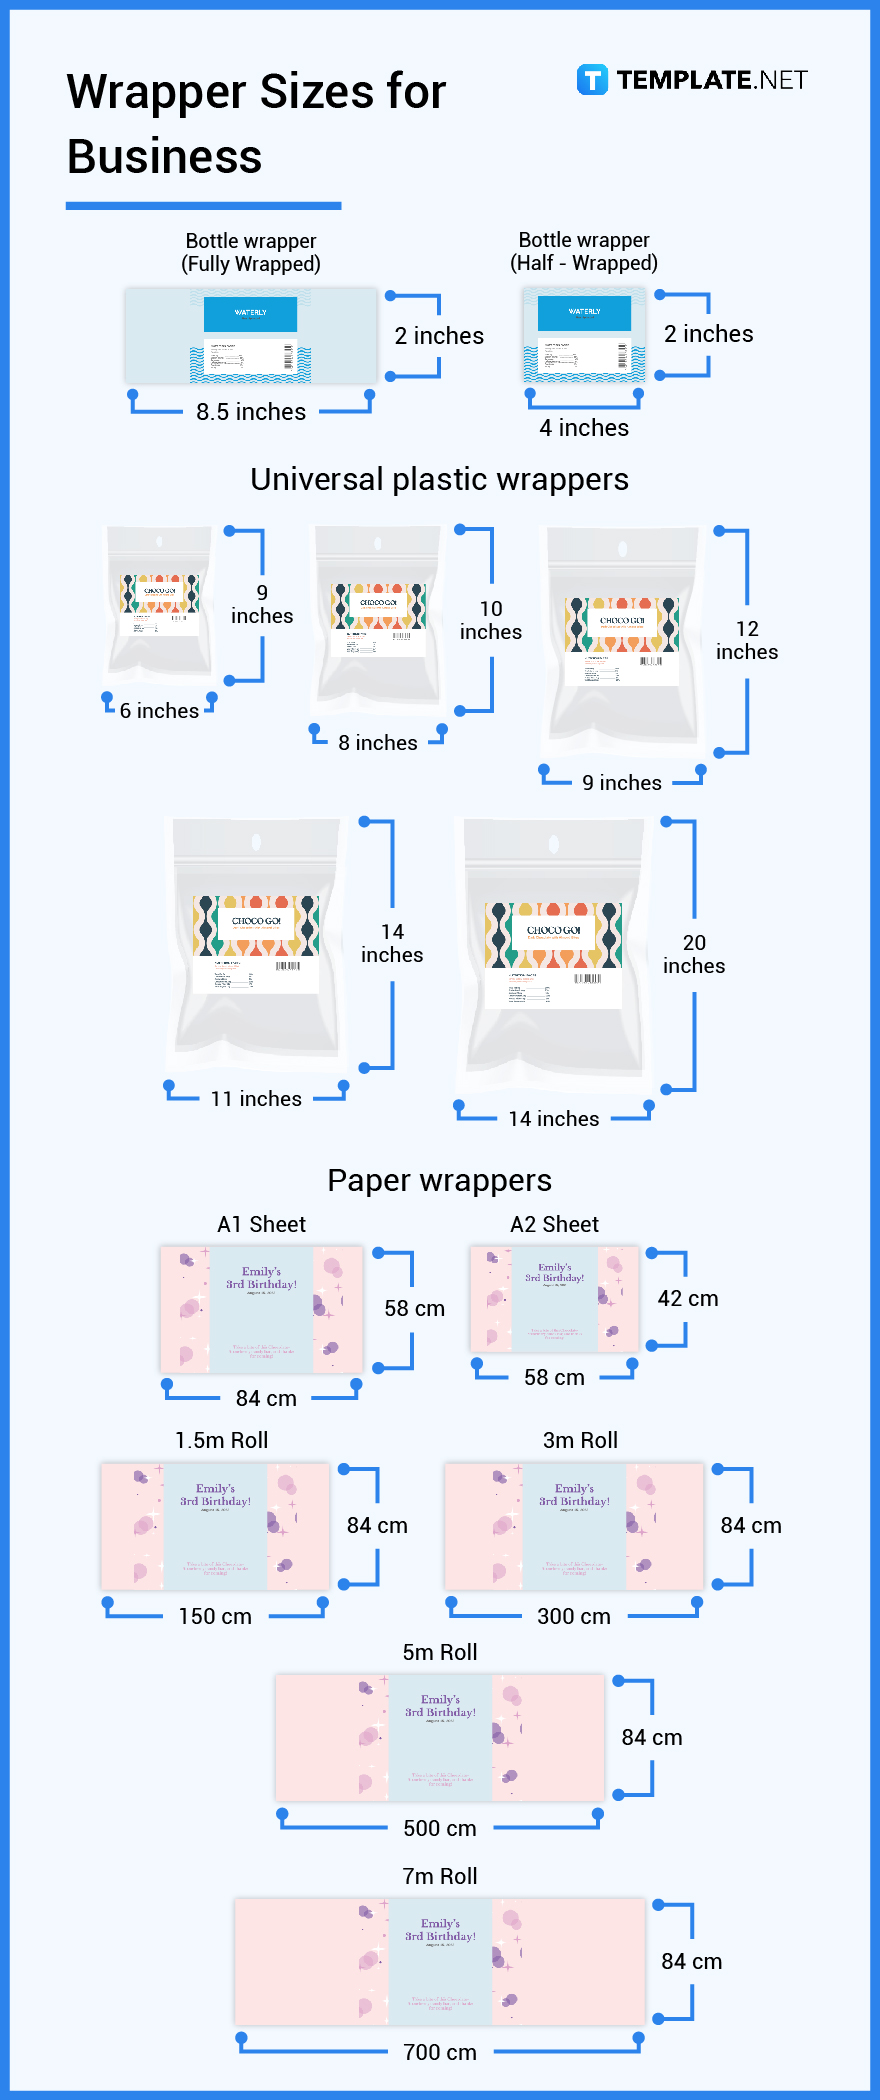 wrapper sizes for business